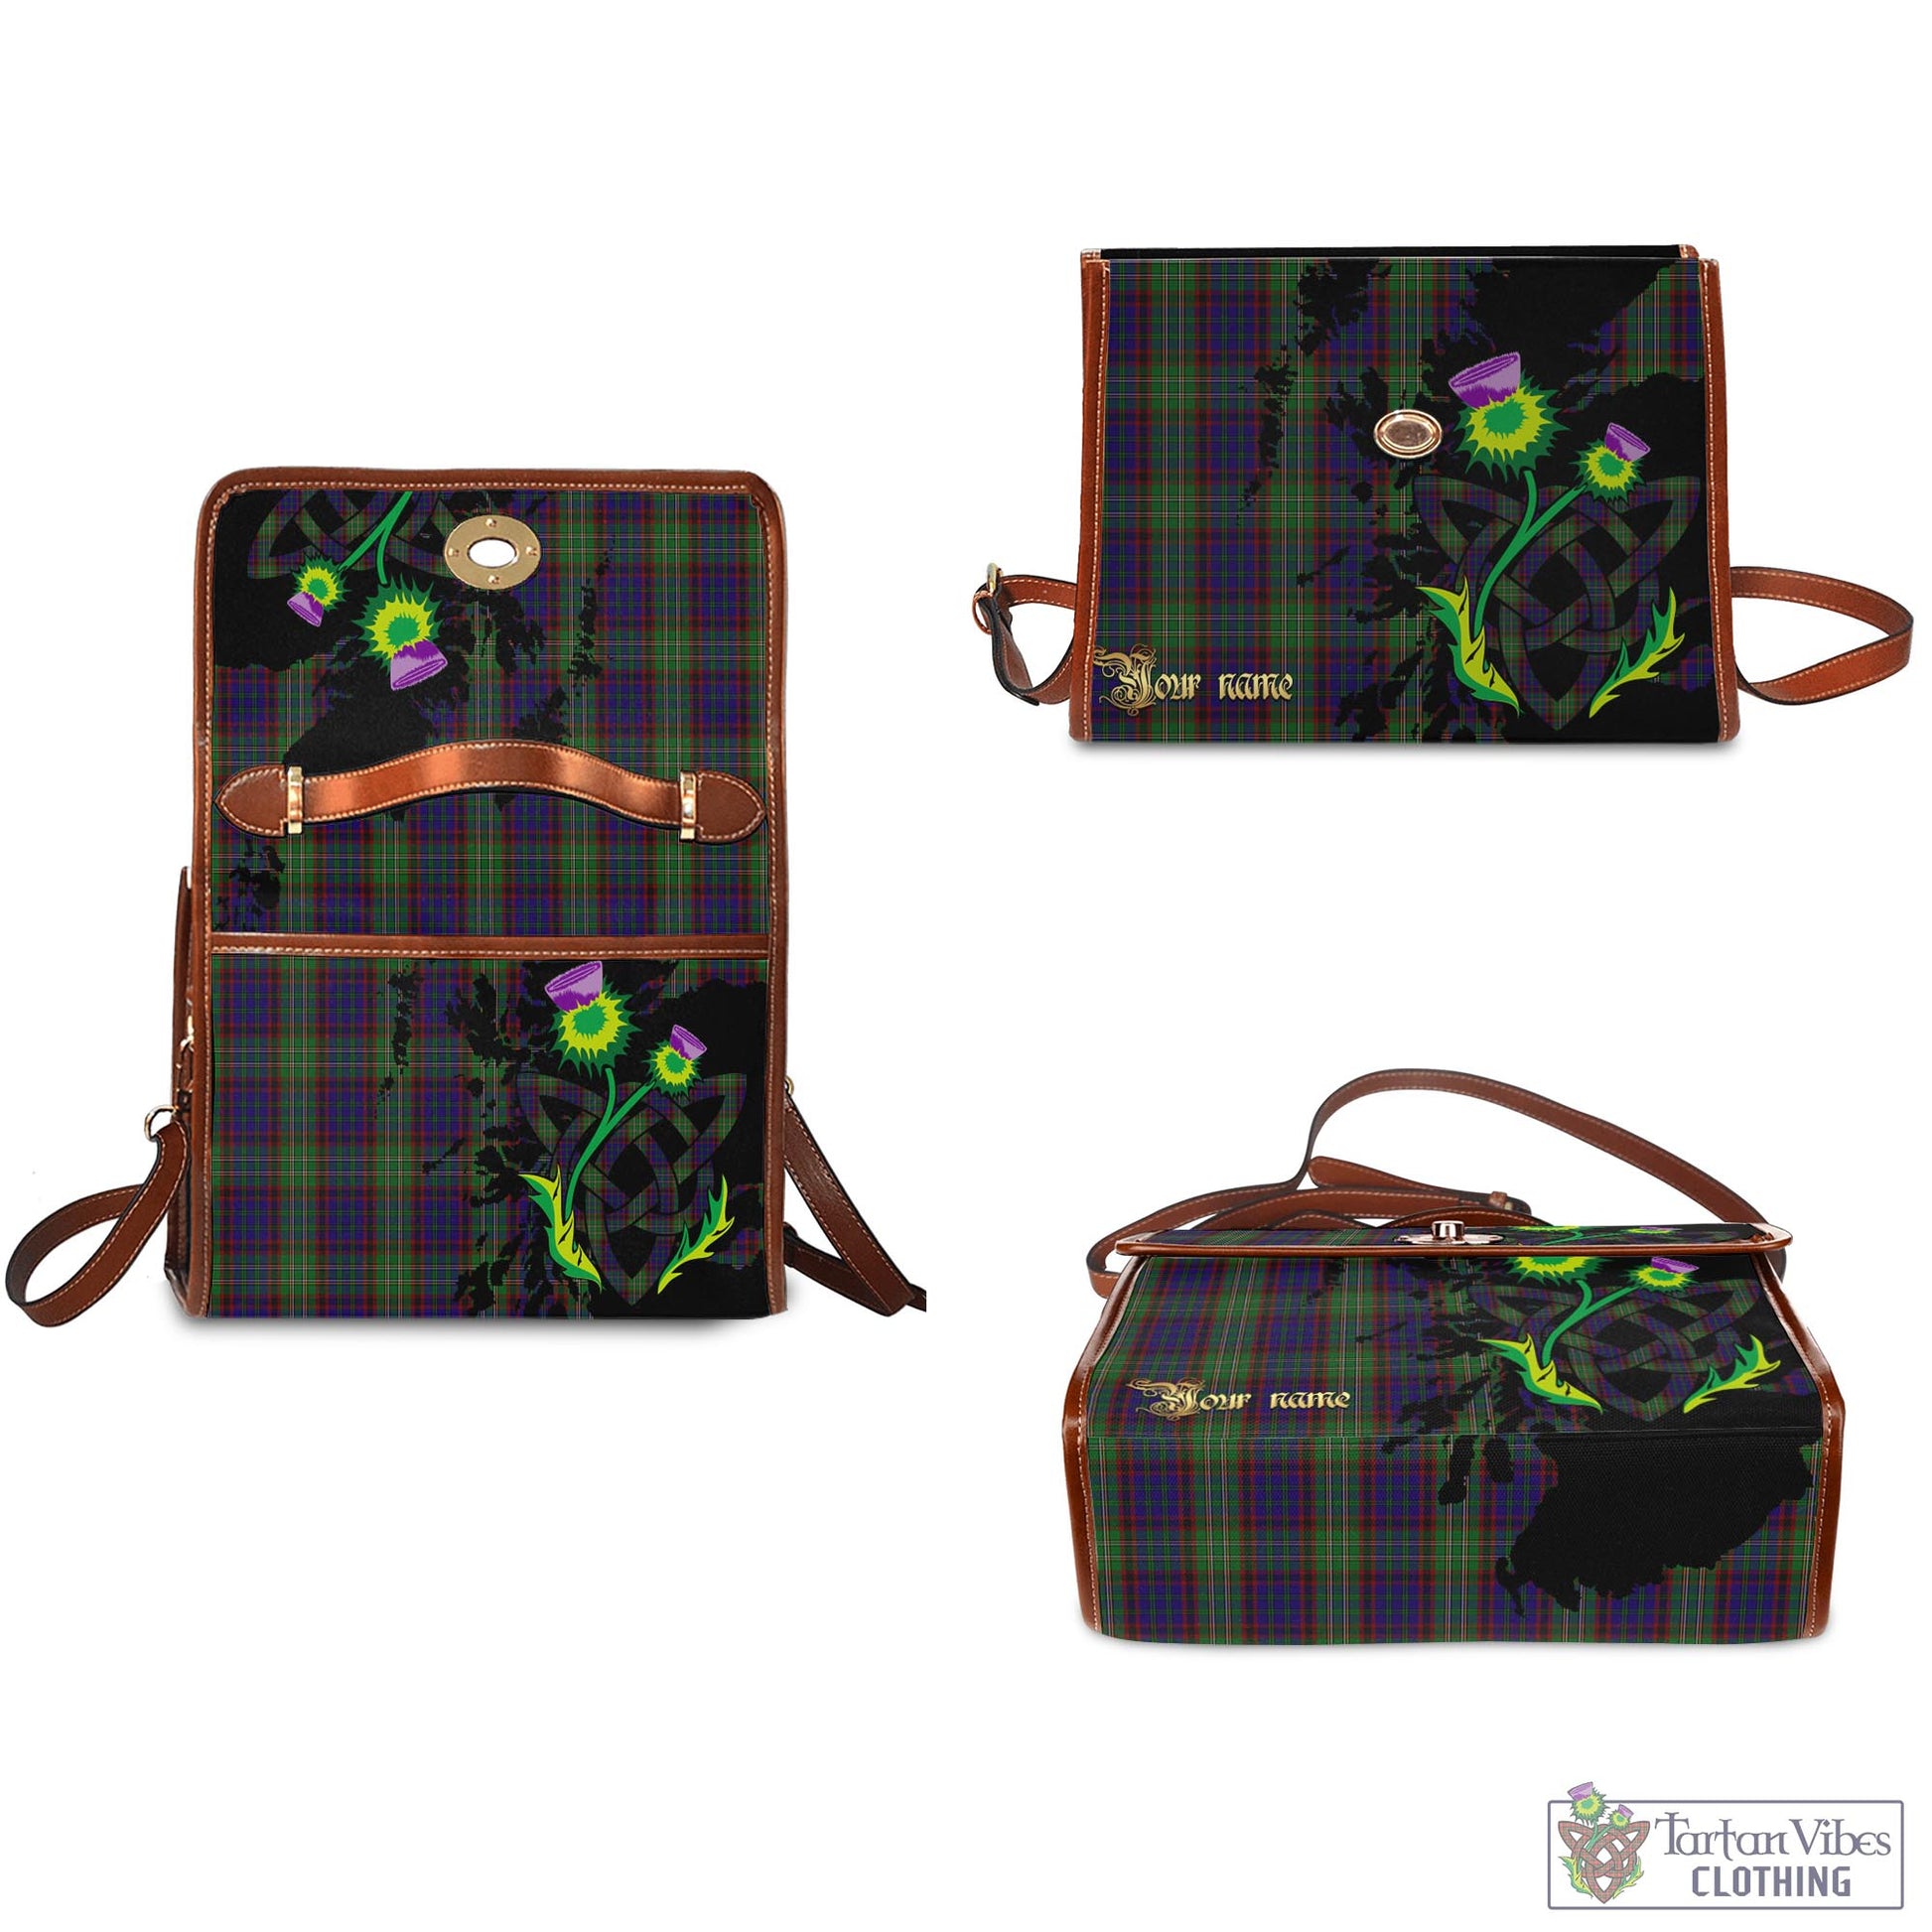 Tartan Vibes Clothing Cunningham Hunting Tartan Waterproof Canvas Bag with Scotland Map and Thistle Celtic Accents